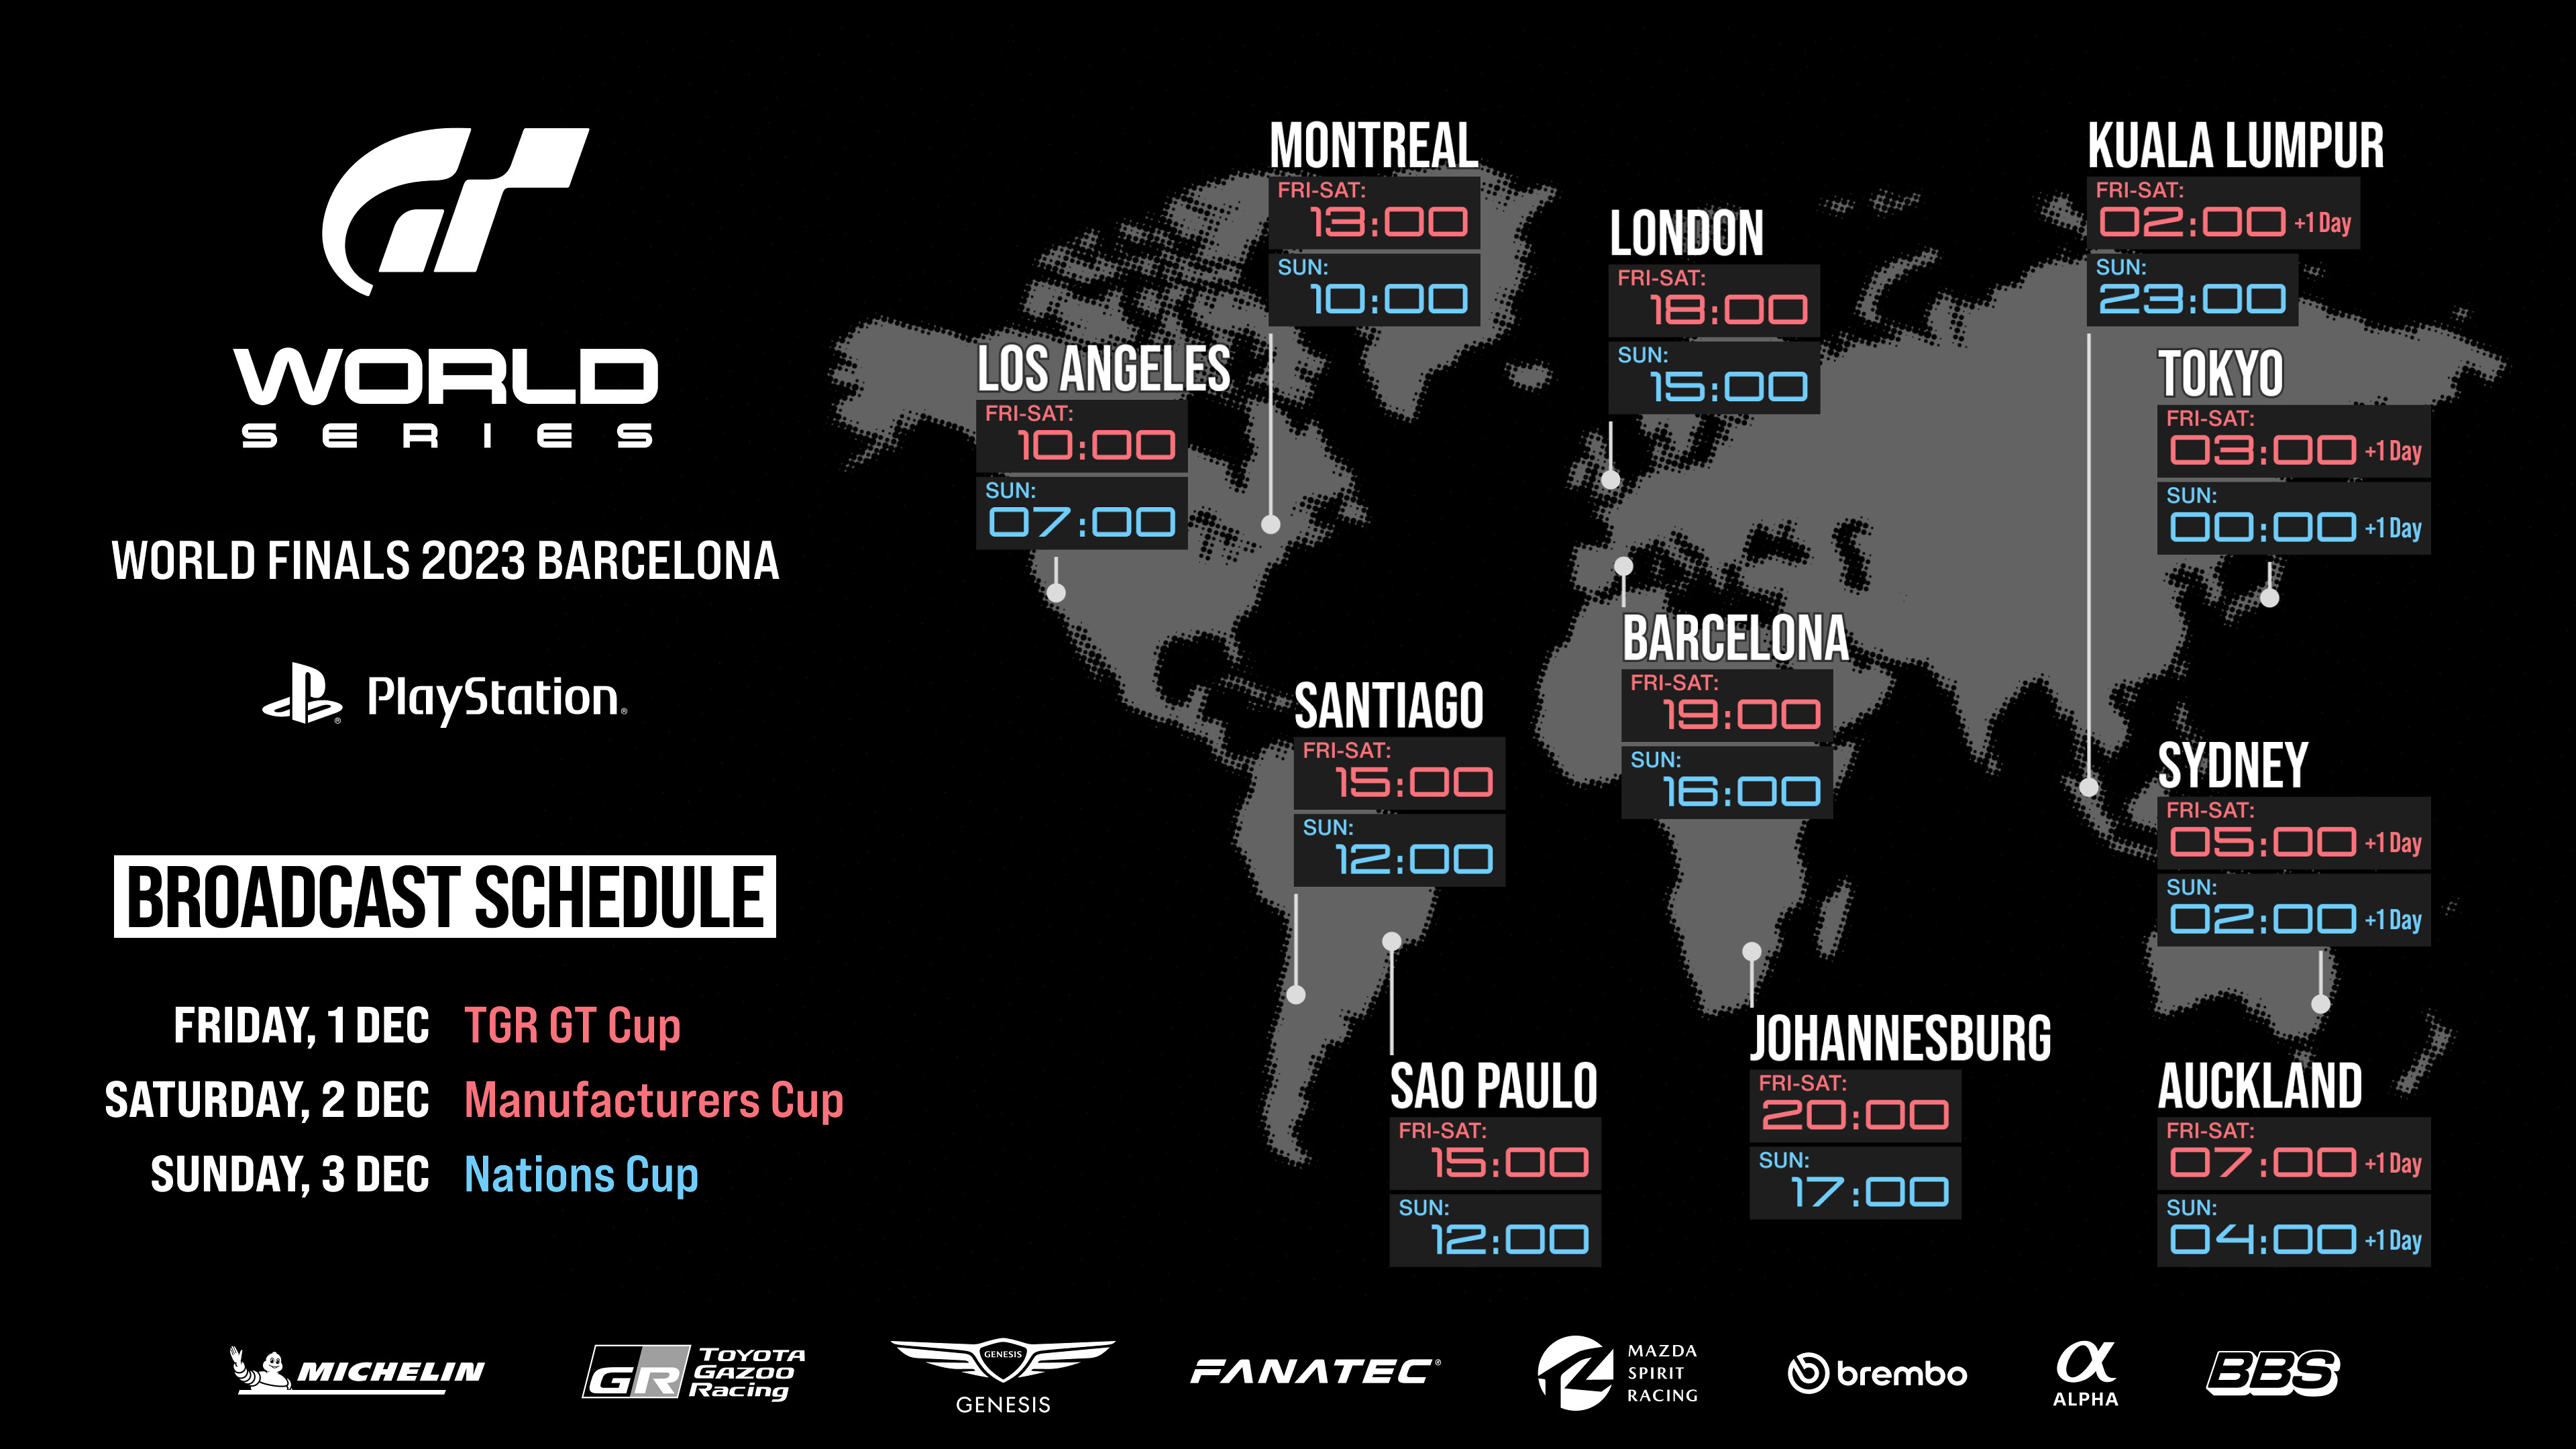 An image showing a world map, marking the local times for the GT World Series World Finals 2023 Barcelona broadcast schedule, running across Friday, 1 December for the Toyota Gazoo Racing GT Cup 2023 Grand Final, Saturday, 2 December for the Manufacturers Cup and Sunday, 3 December for the Nations Cup. Los Angeles Fri-Sat is 10am PT, Sun at 7am PT. London Fri-Sat is 6pm GMT, Sun 3pm GMT, Tokyo Fri-Sat 3am (+ 1 day) and Sun midnight (+ 1 day)